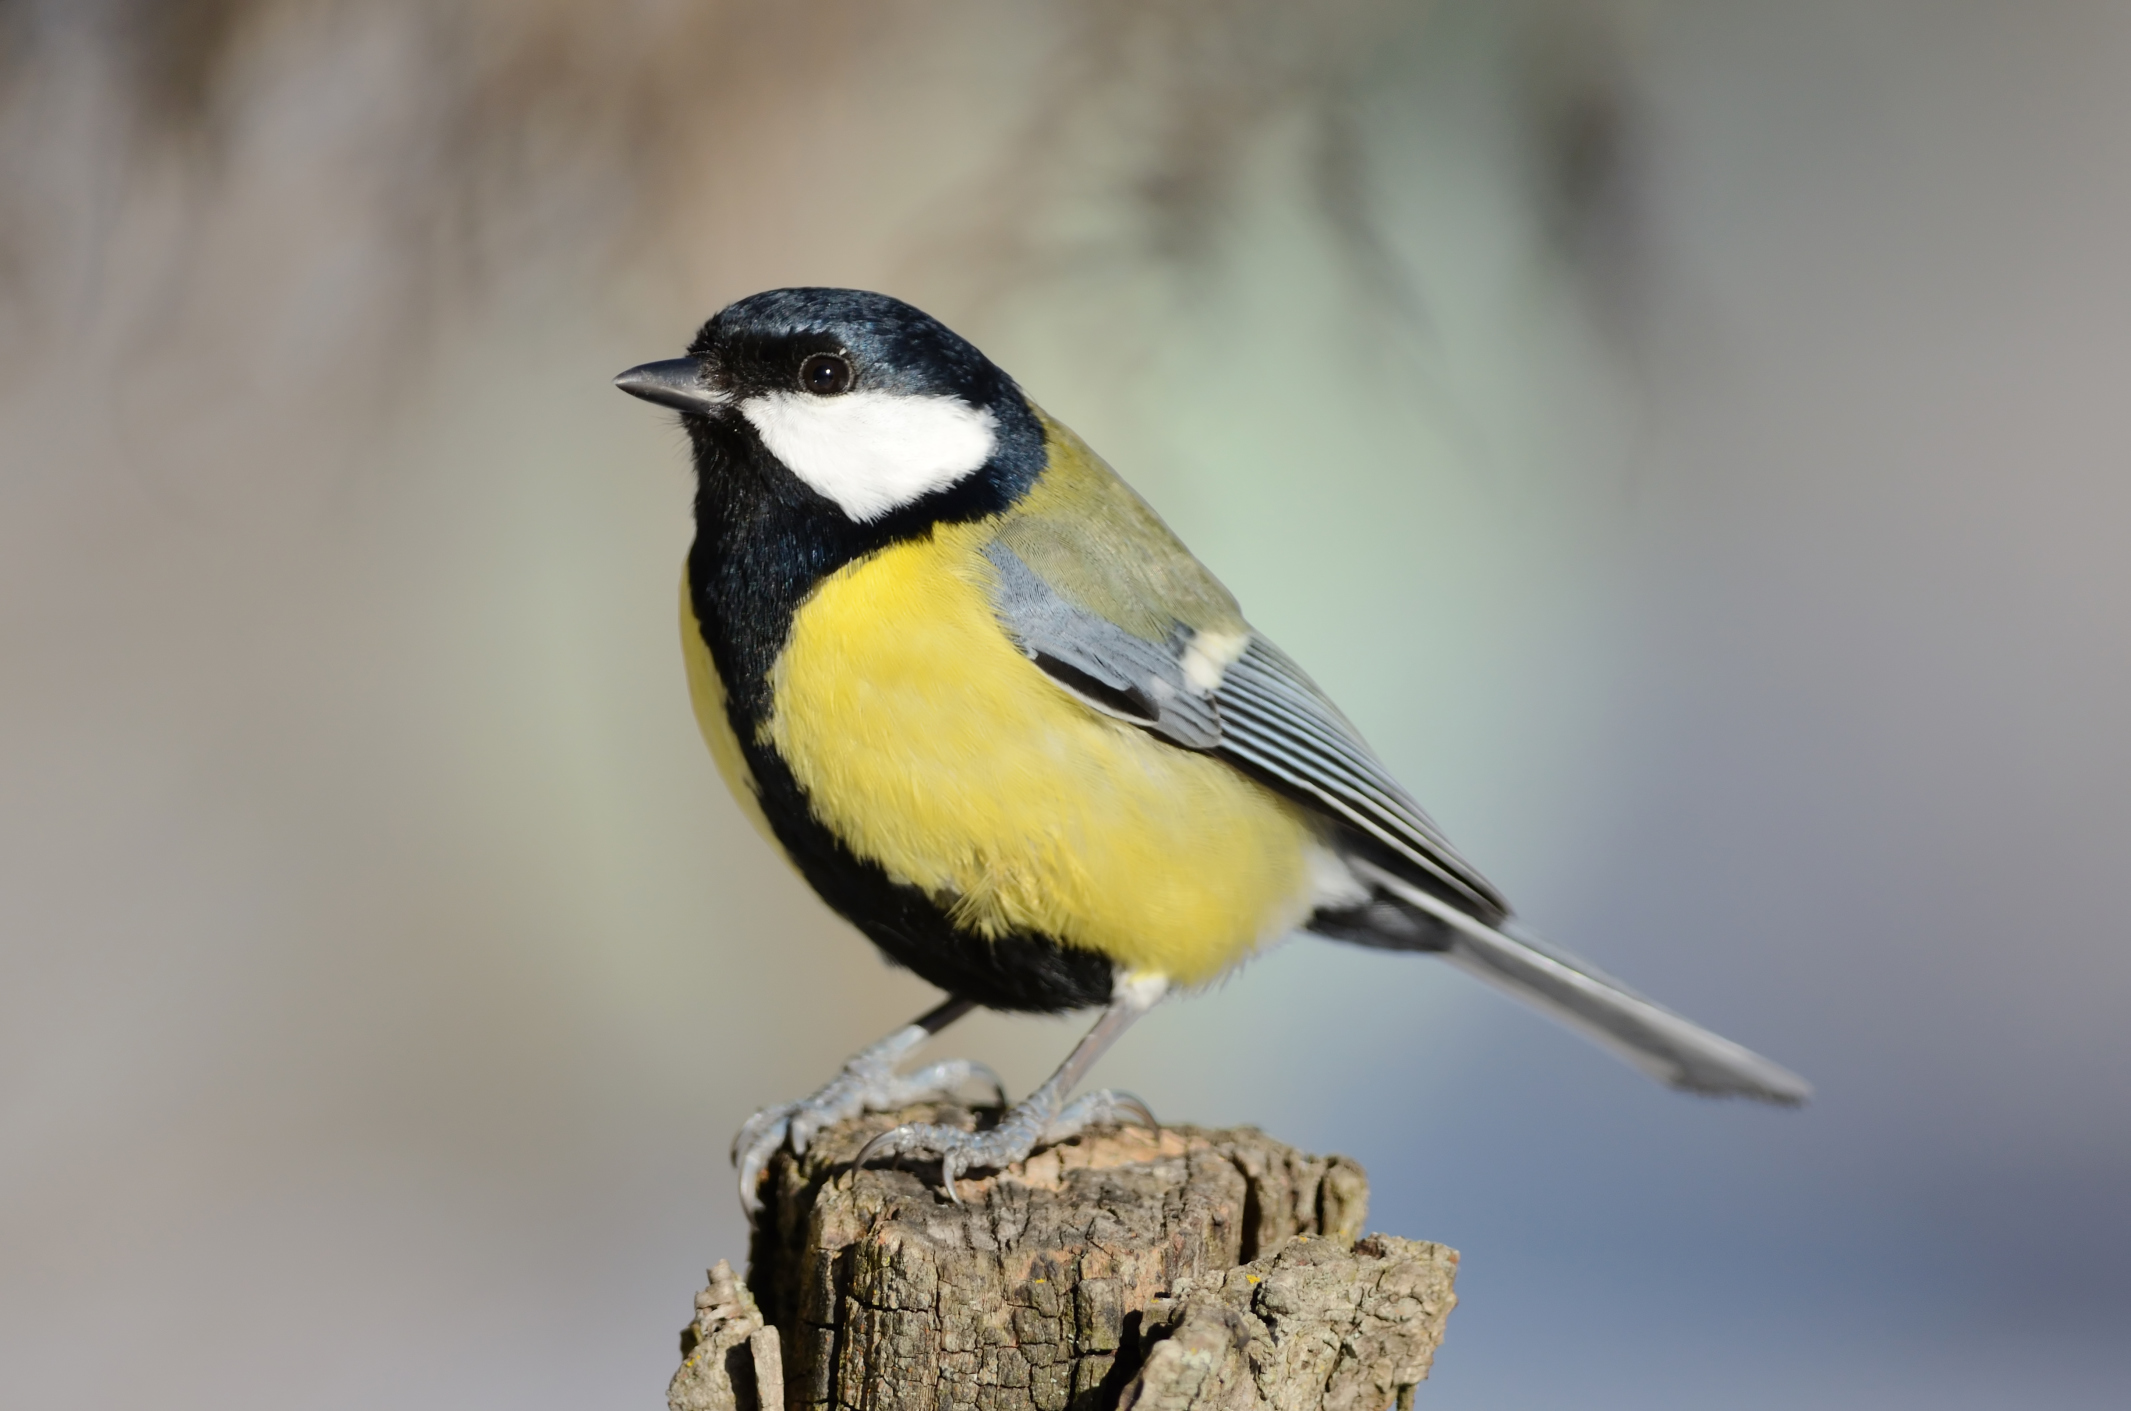 Dubwath Silver Meadows supports many different types of wildlife, including the Great Tit